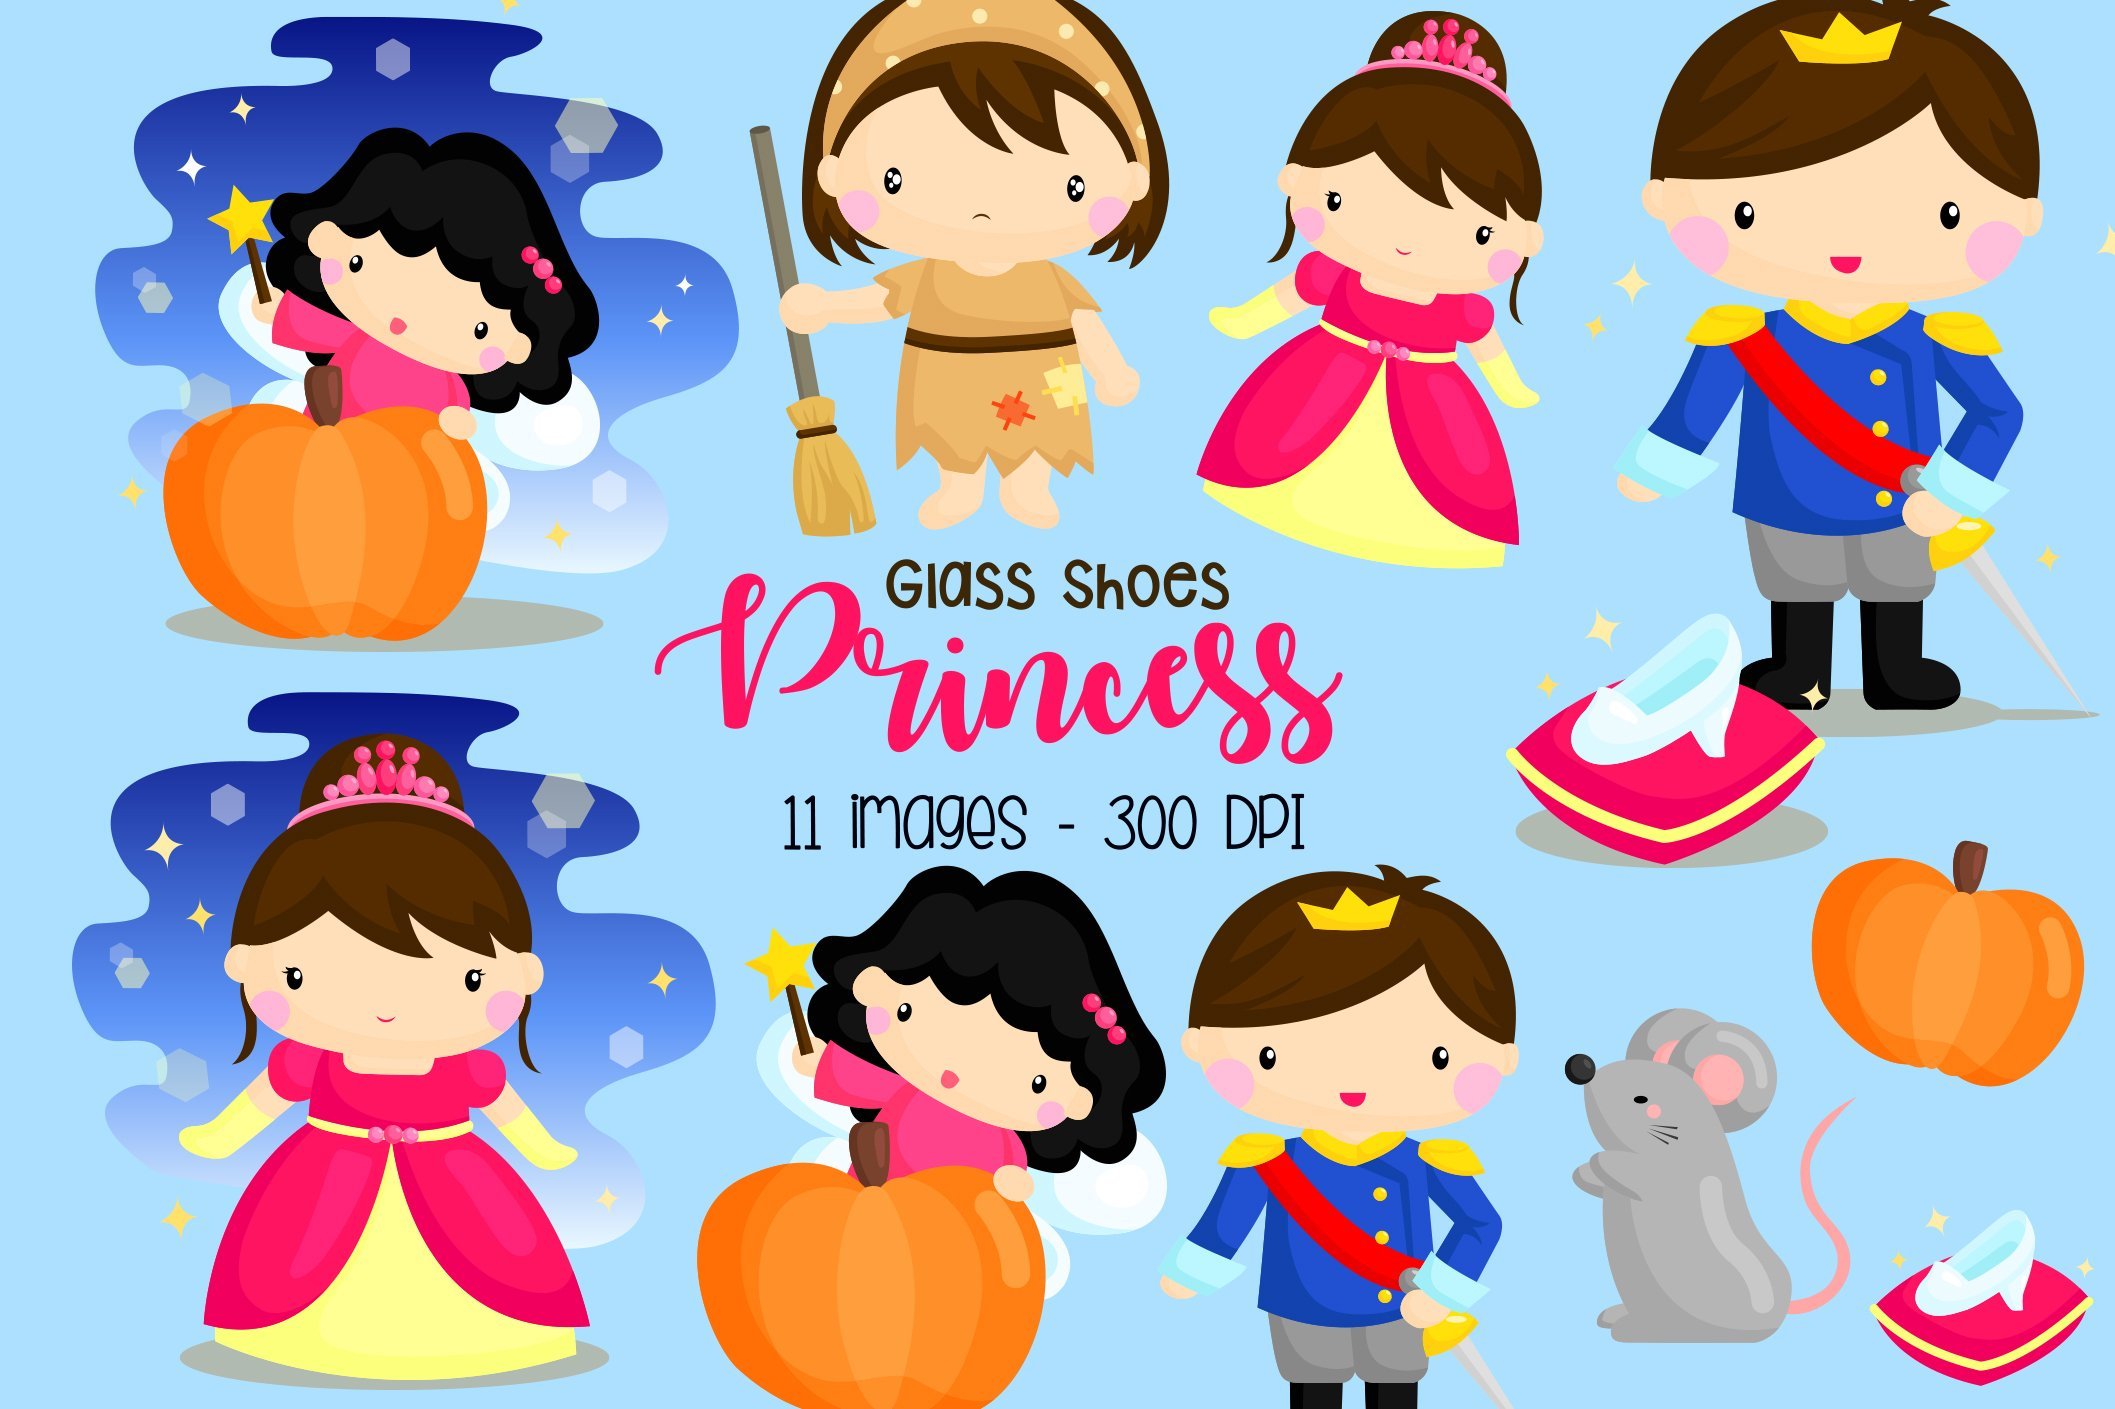 Cinderella Story Fairytale Clipart cover image.